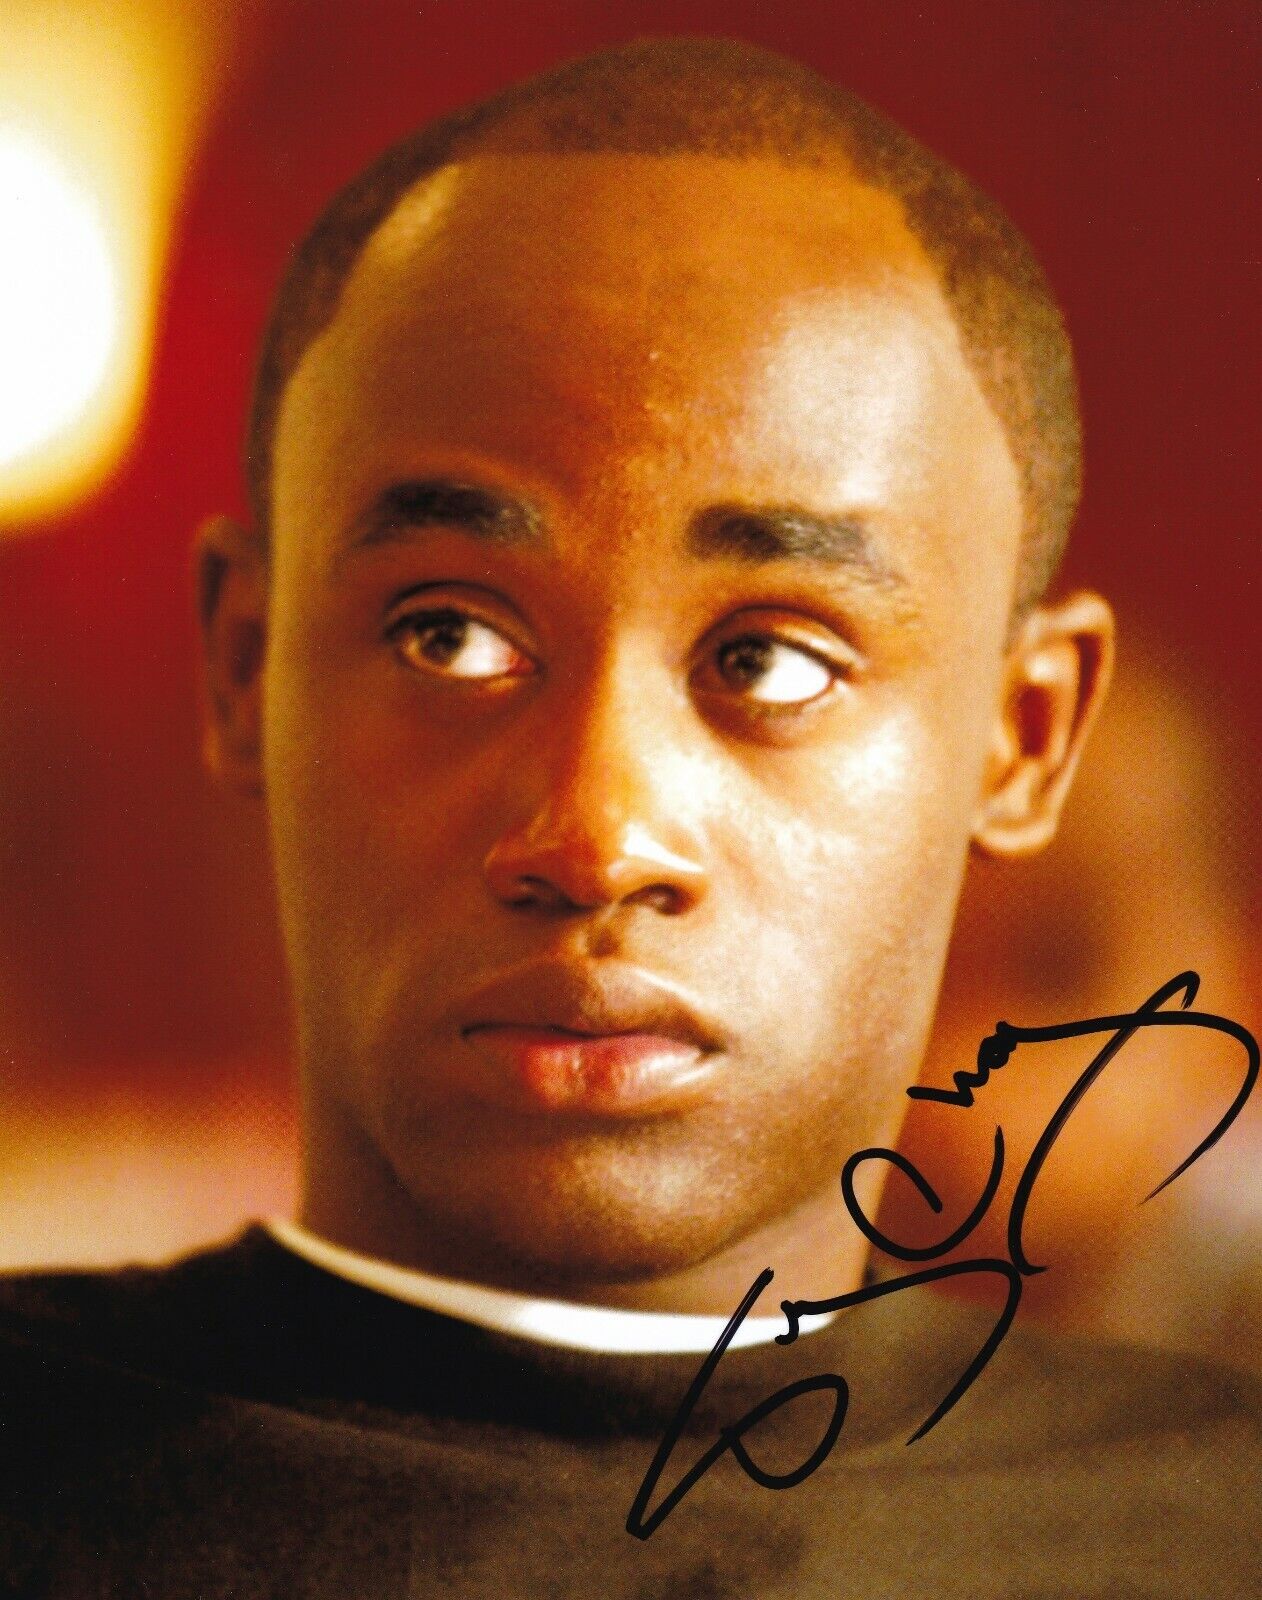 Tray Chaney REAL hand SIGNED Photo Poster painting #1 COA Autographed HBO The Wire Tv Actor